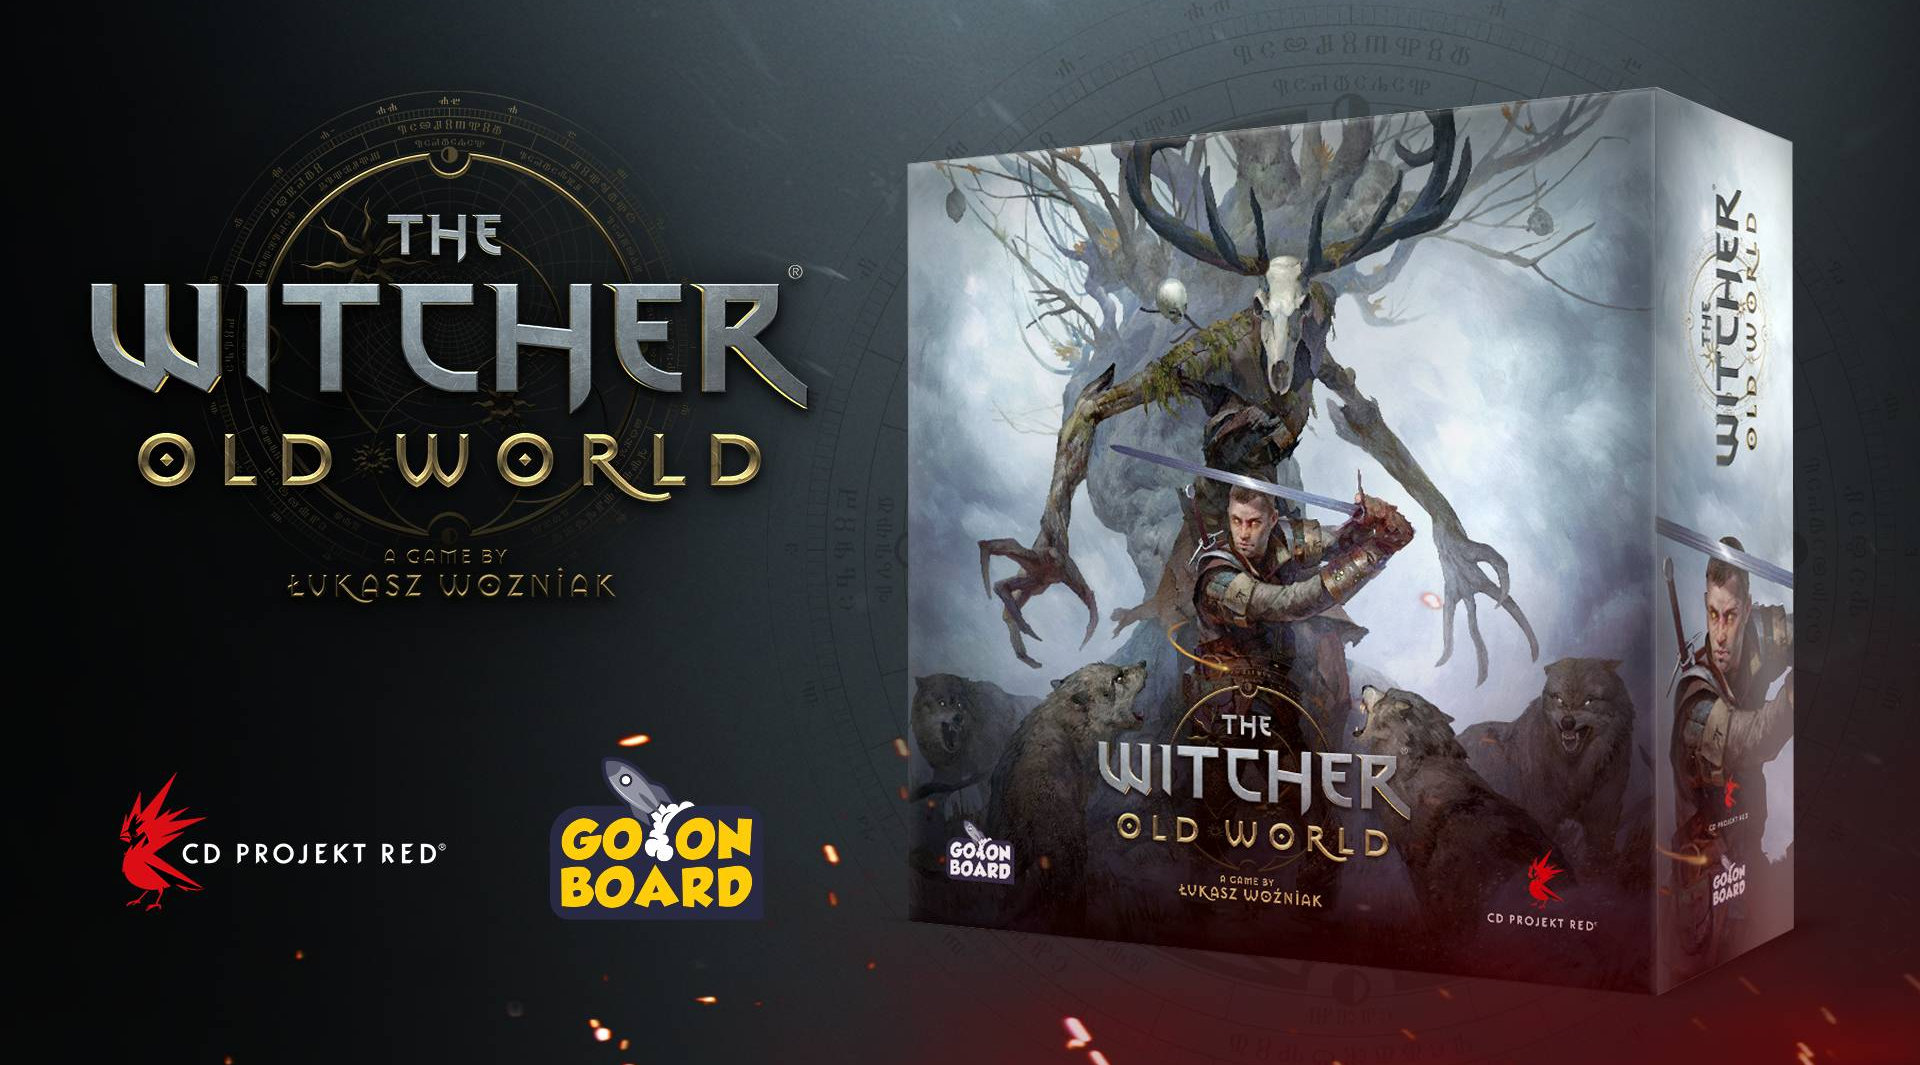 The Witcher: Old World